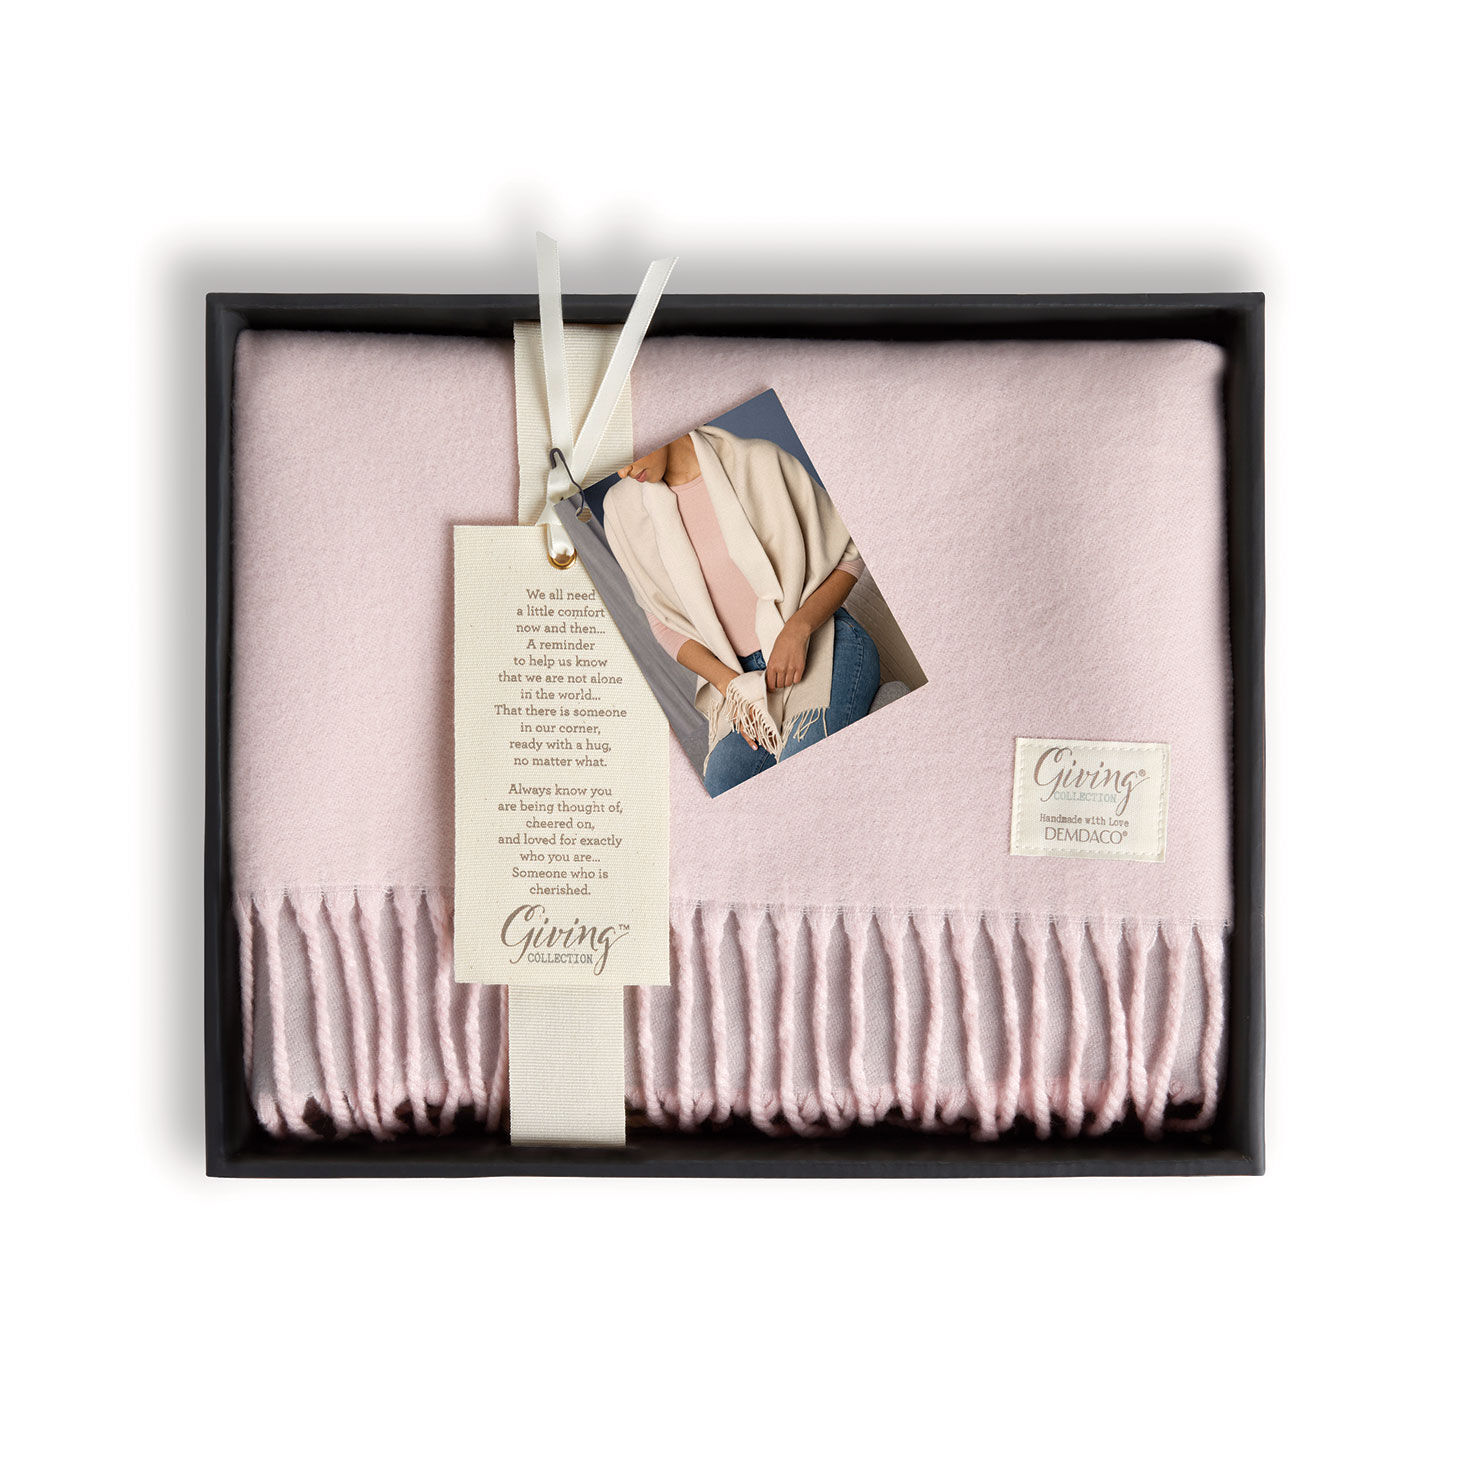 Demdaco Pale Pink Giving Wrap for only USD 39.99 | Hallmark